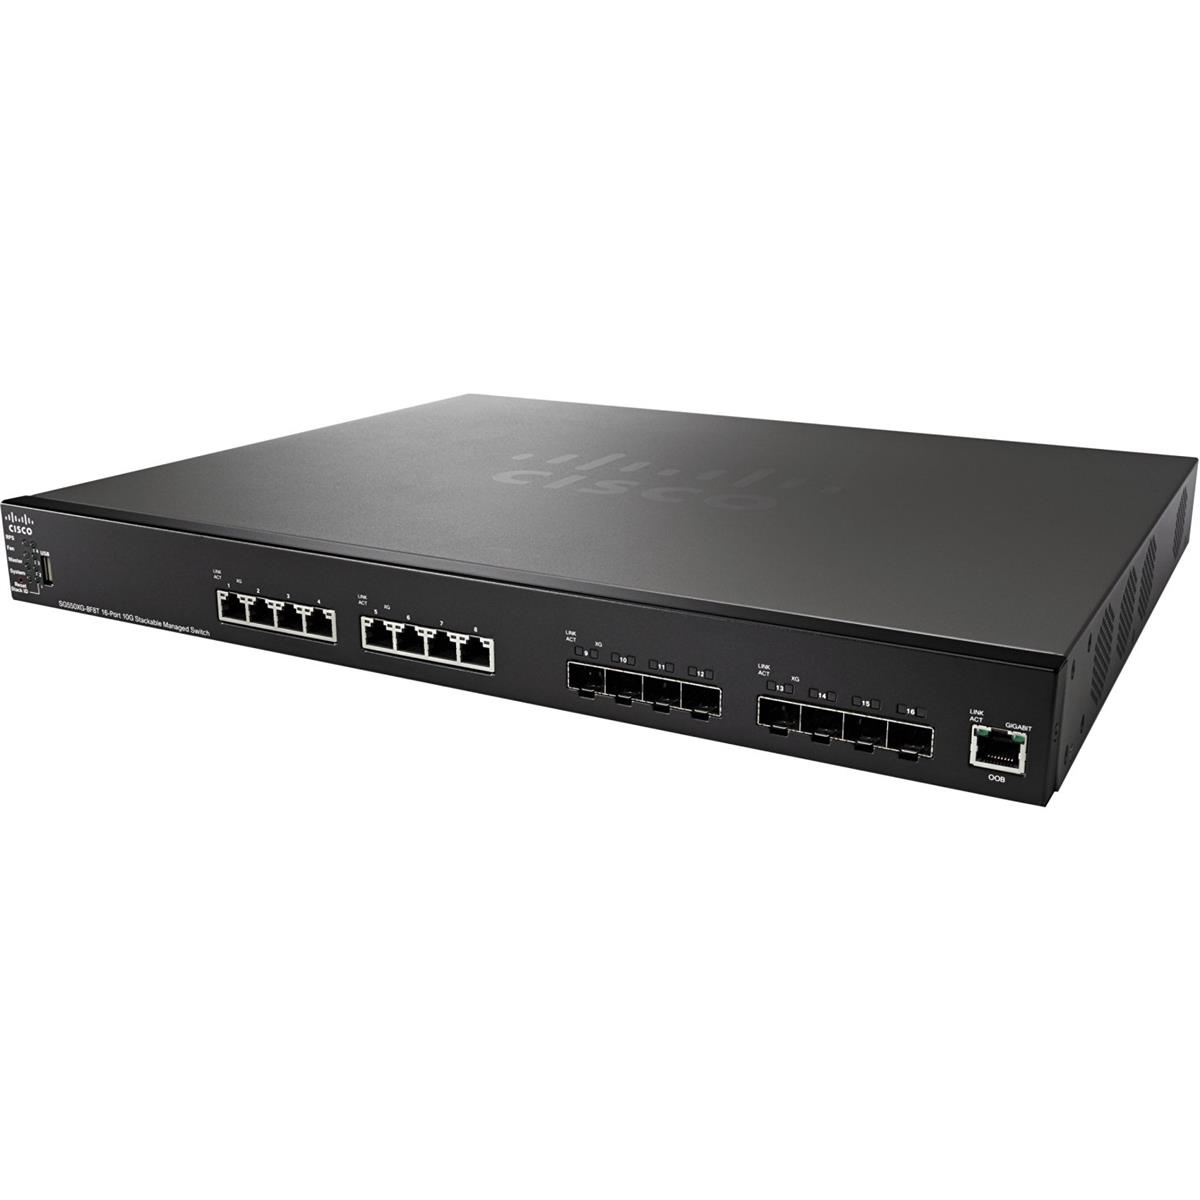 

Cisco SG550XG-8F8T 16 Port 10G Stackable Managed Switch